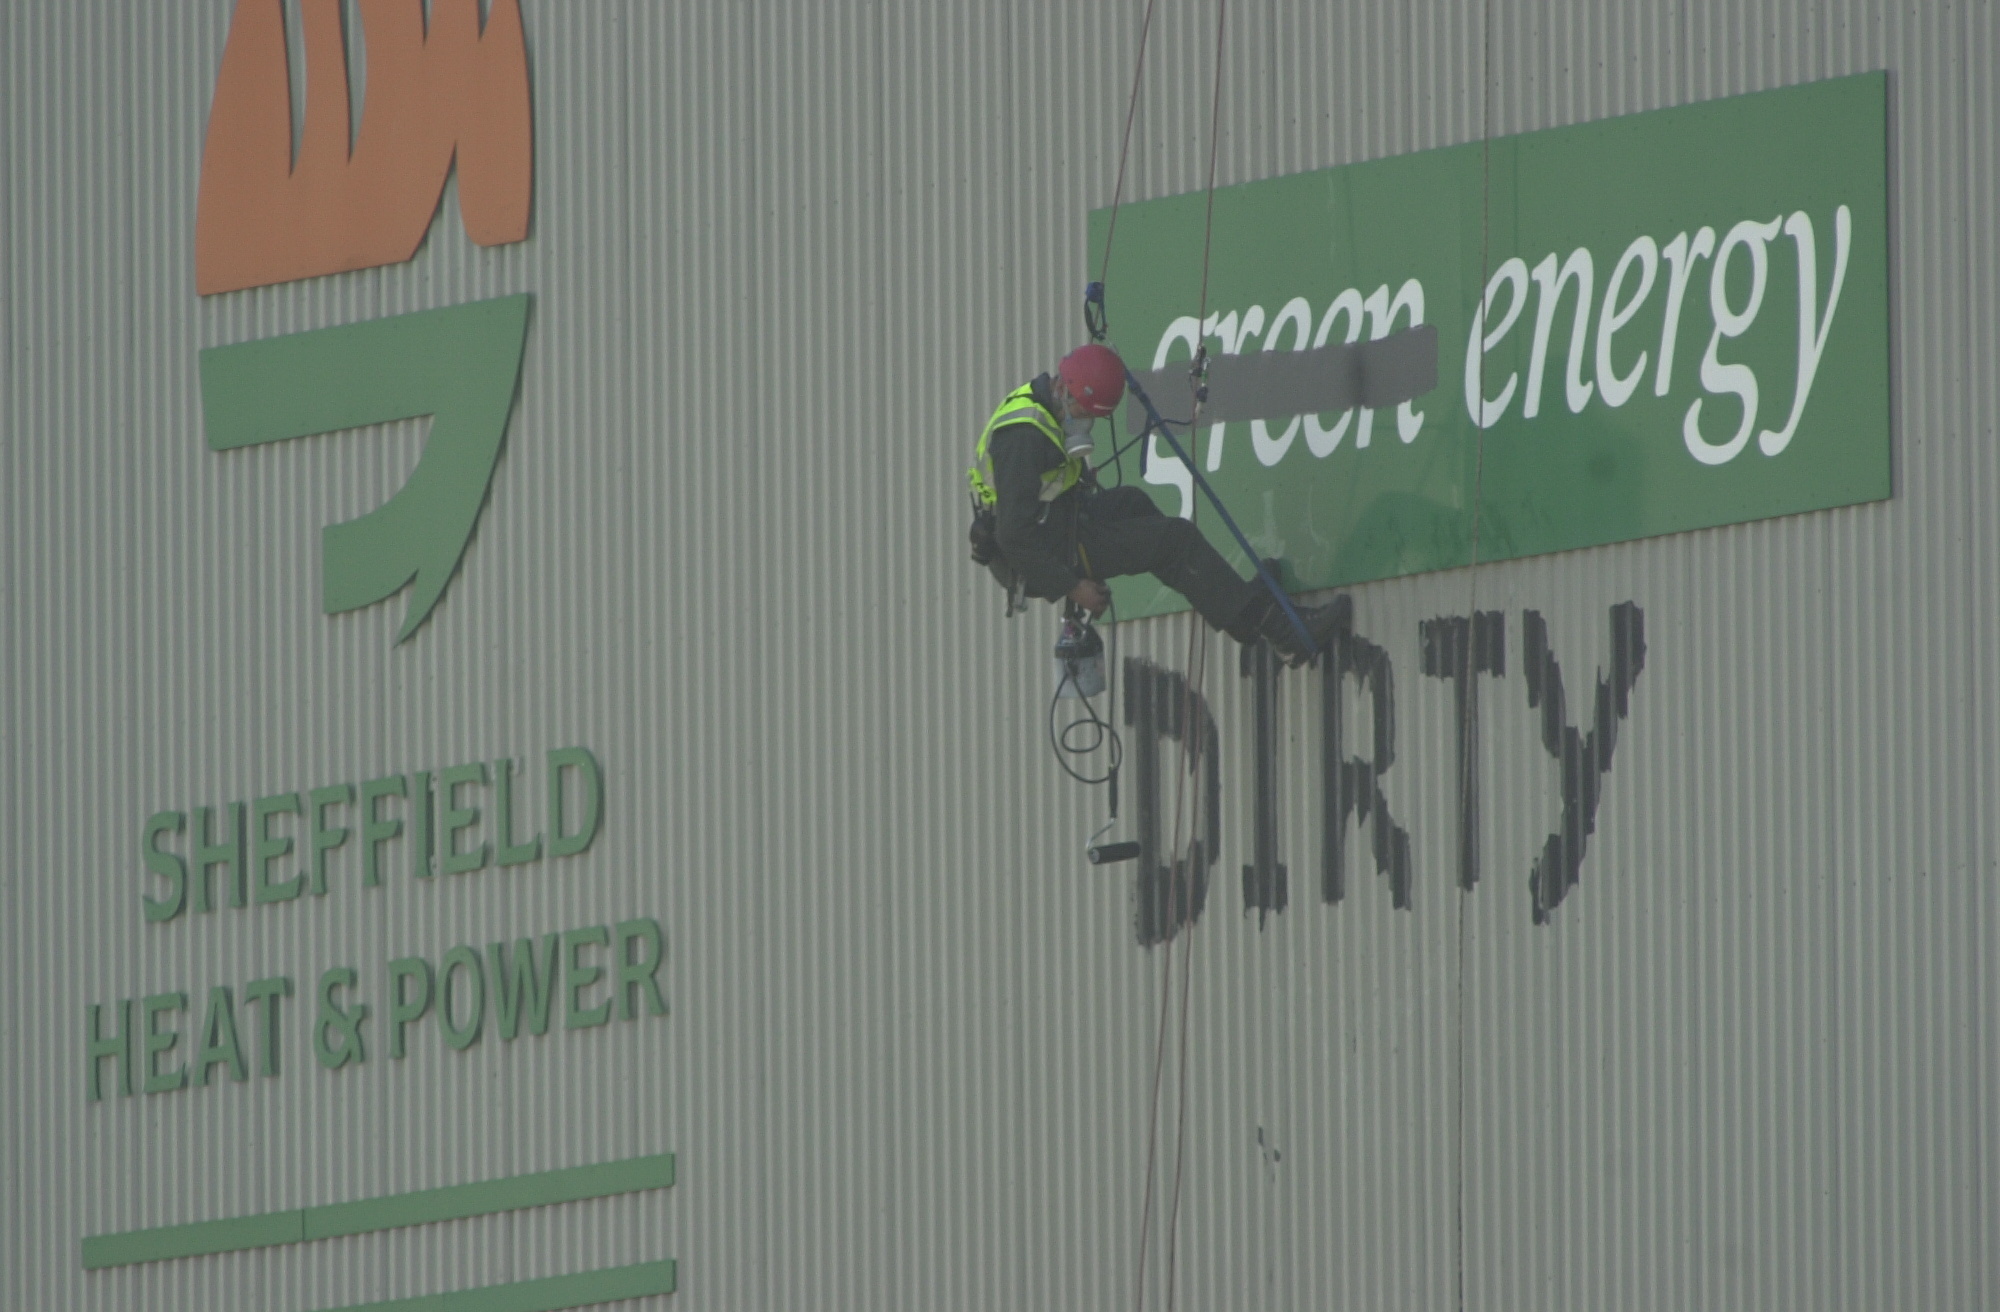 Climber on side of building painting over sign "green energy" to read "dirty". Other sign says "Sheffield Heat and Power".